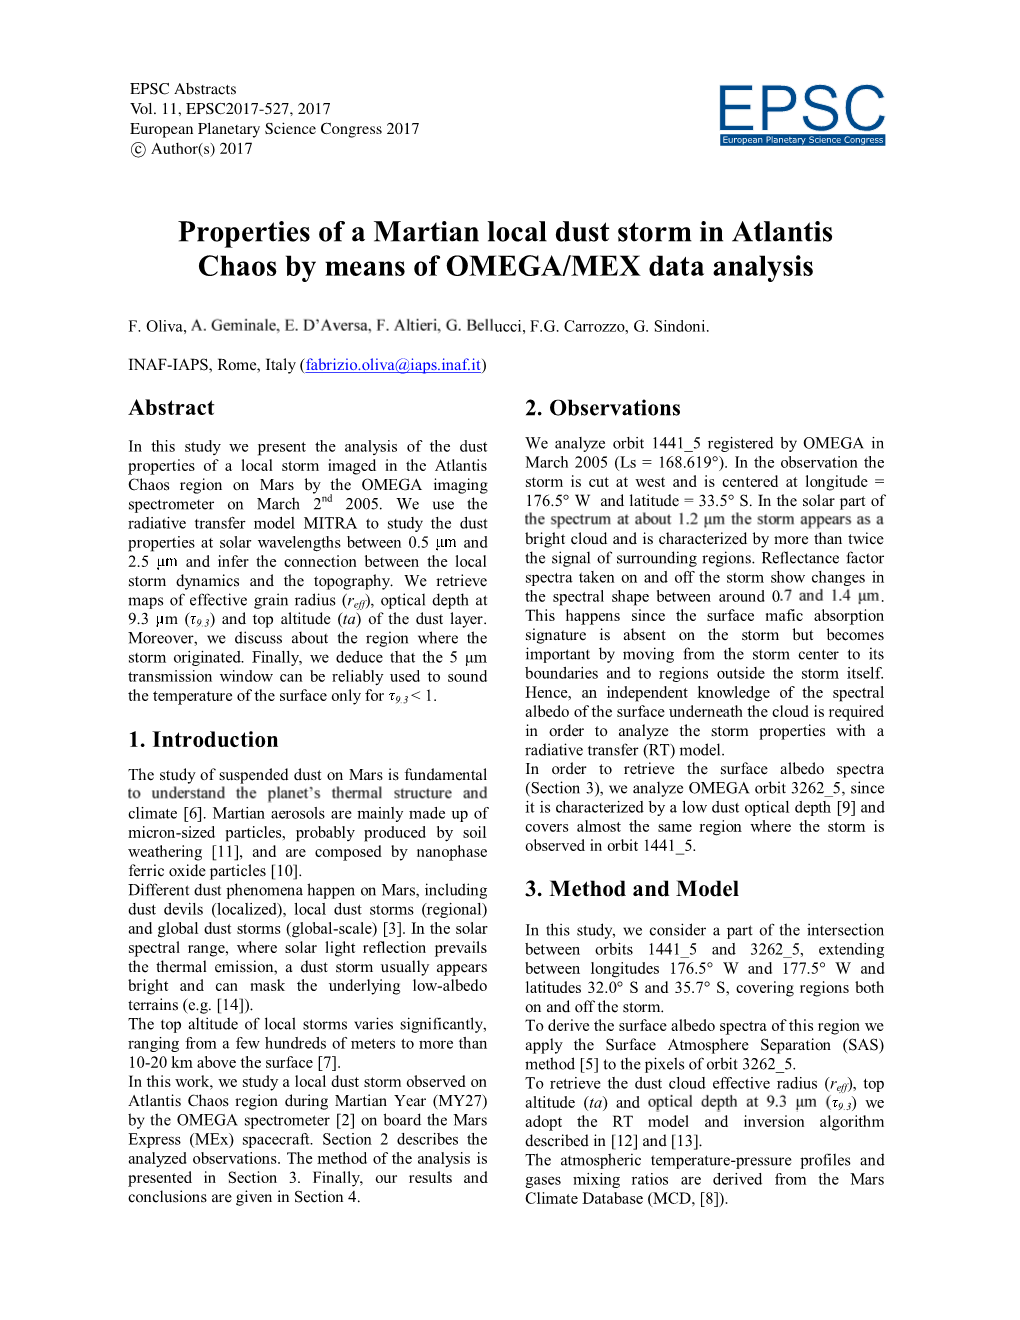 Properties of a Martian Local Dust Storm in Atlantis Chaos by Means of OMEGA/MEX Data Analysis